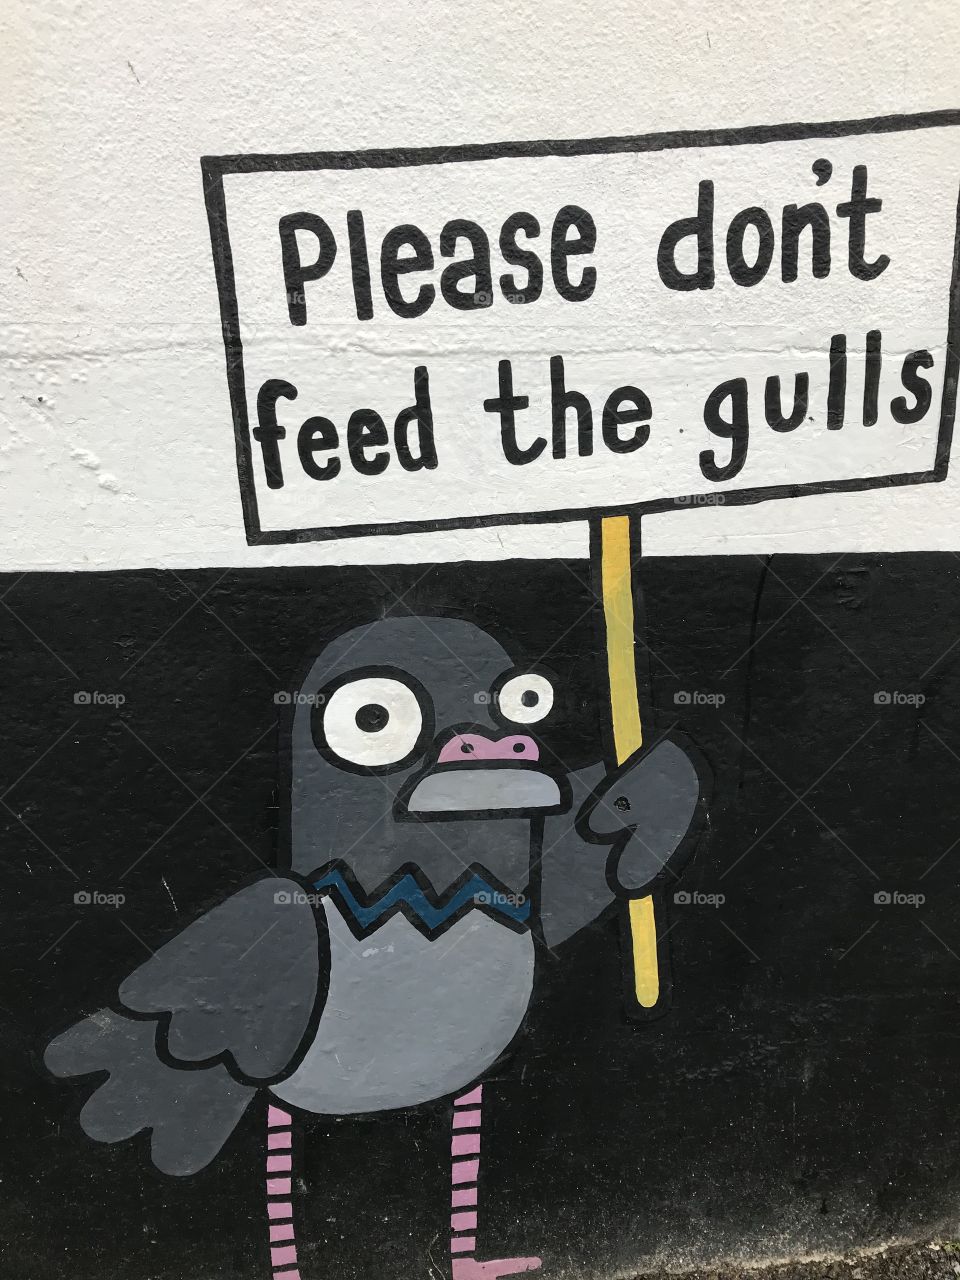 Gulls  not wanted, this message gets the point across.